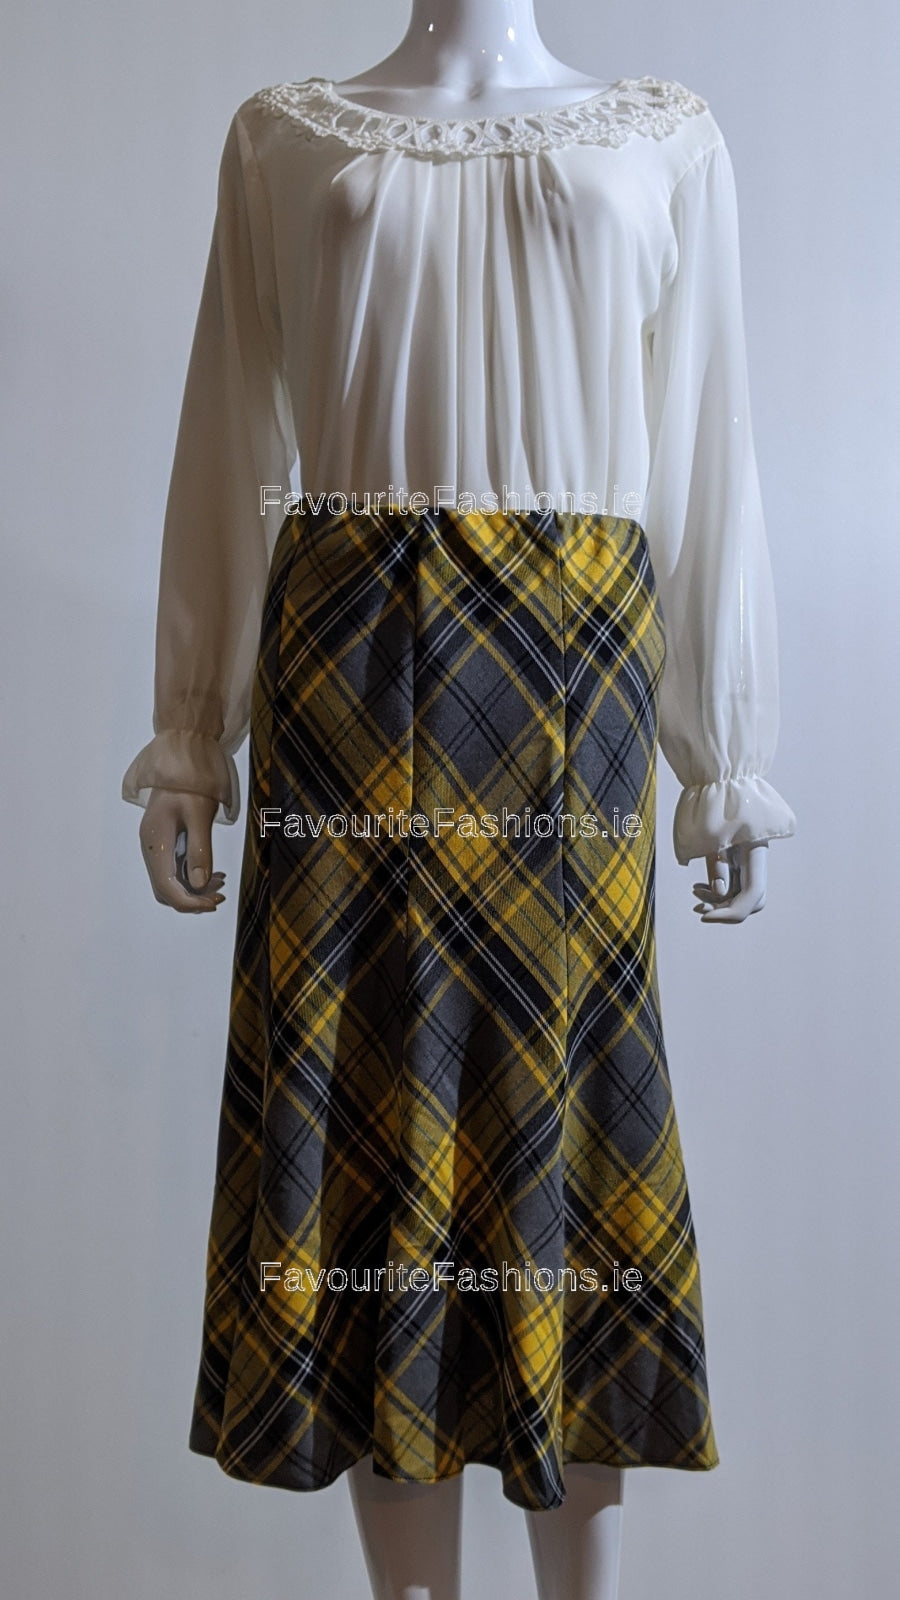 Grey & Yellow Elasticated Lined A-Line Checked Tartan Skirt